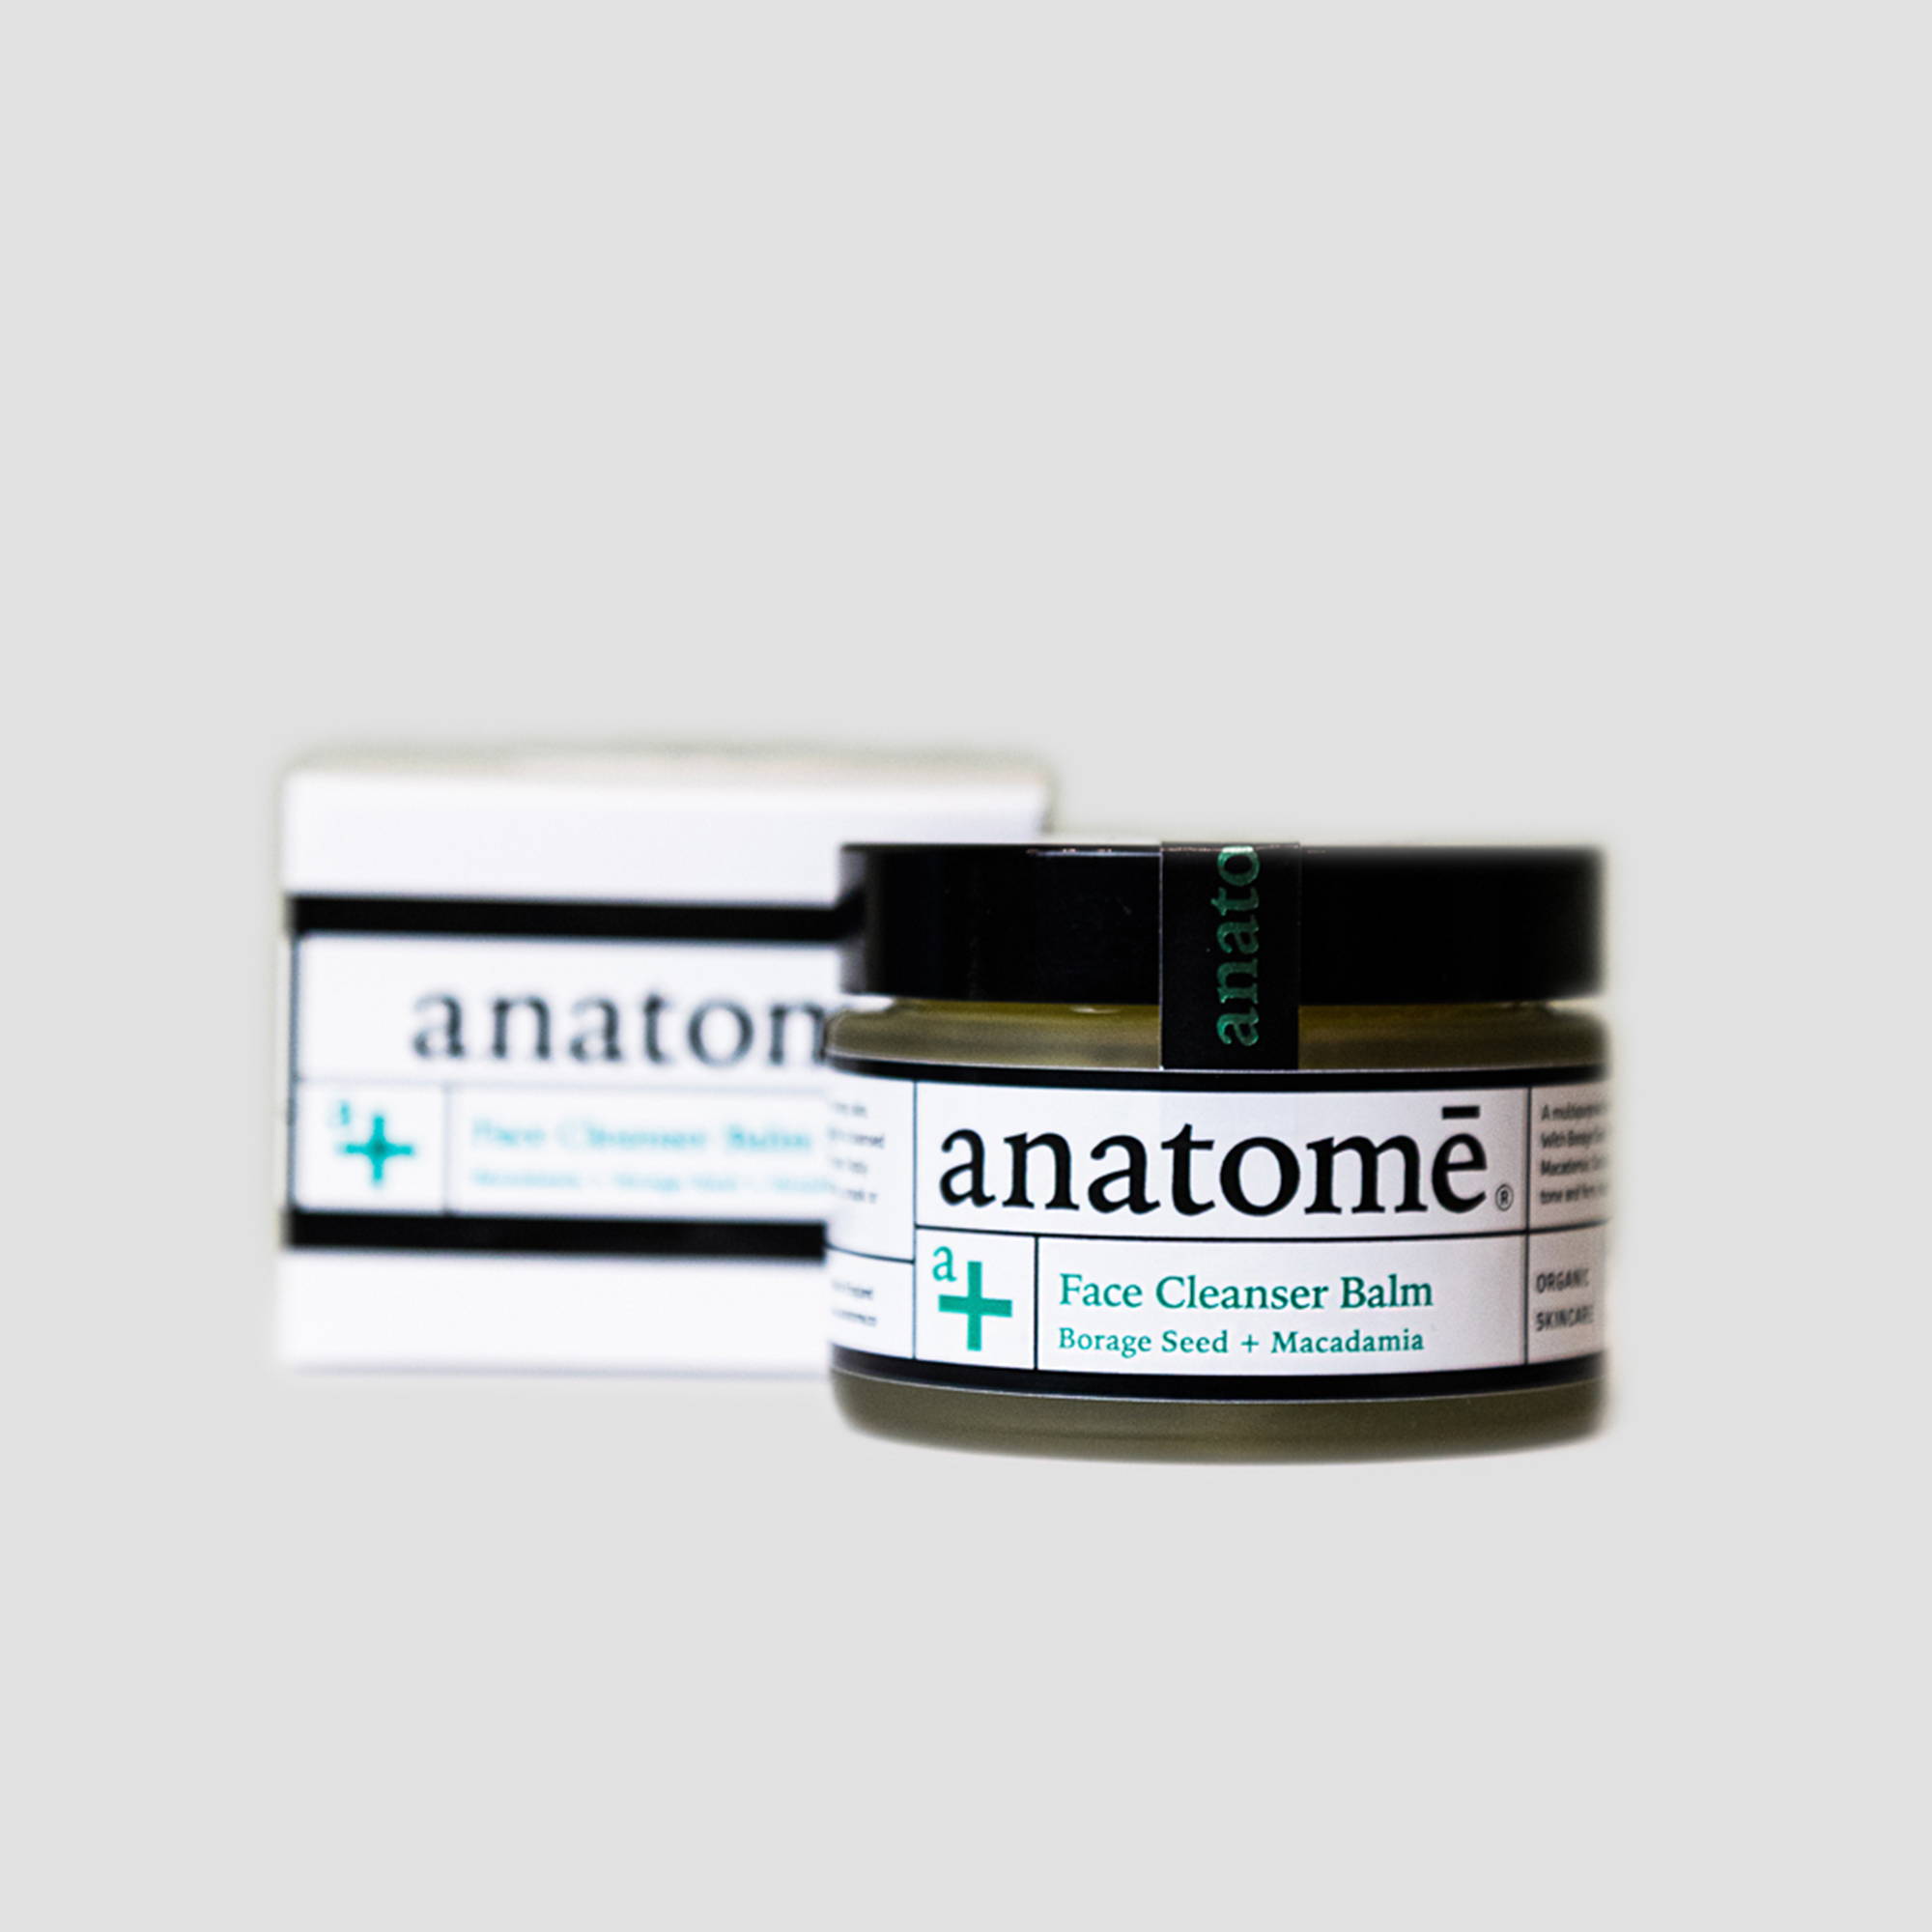 Anatome Face cleanser balm